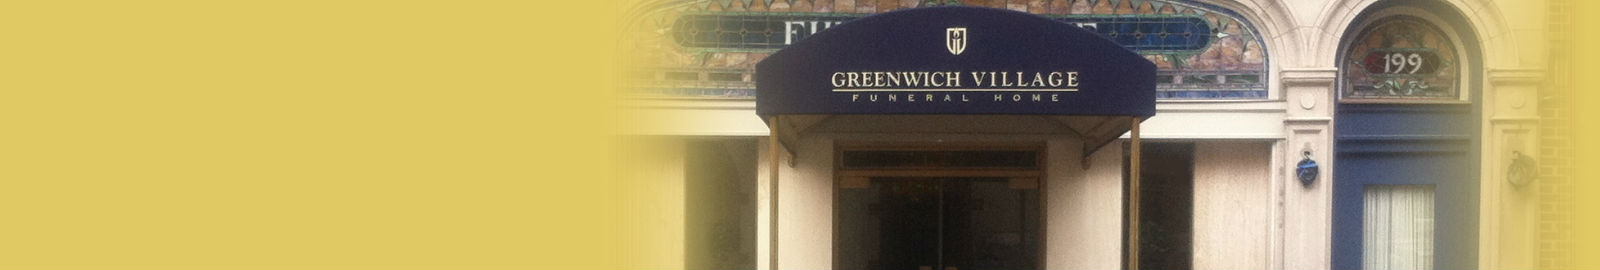 Greenwich Village Funeral Home Facade with Awning